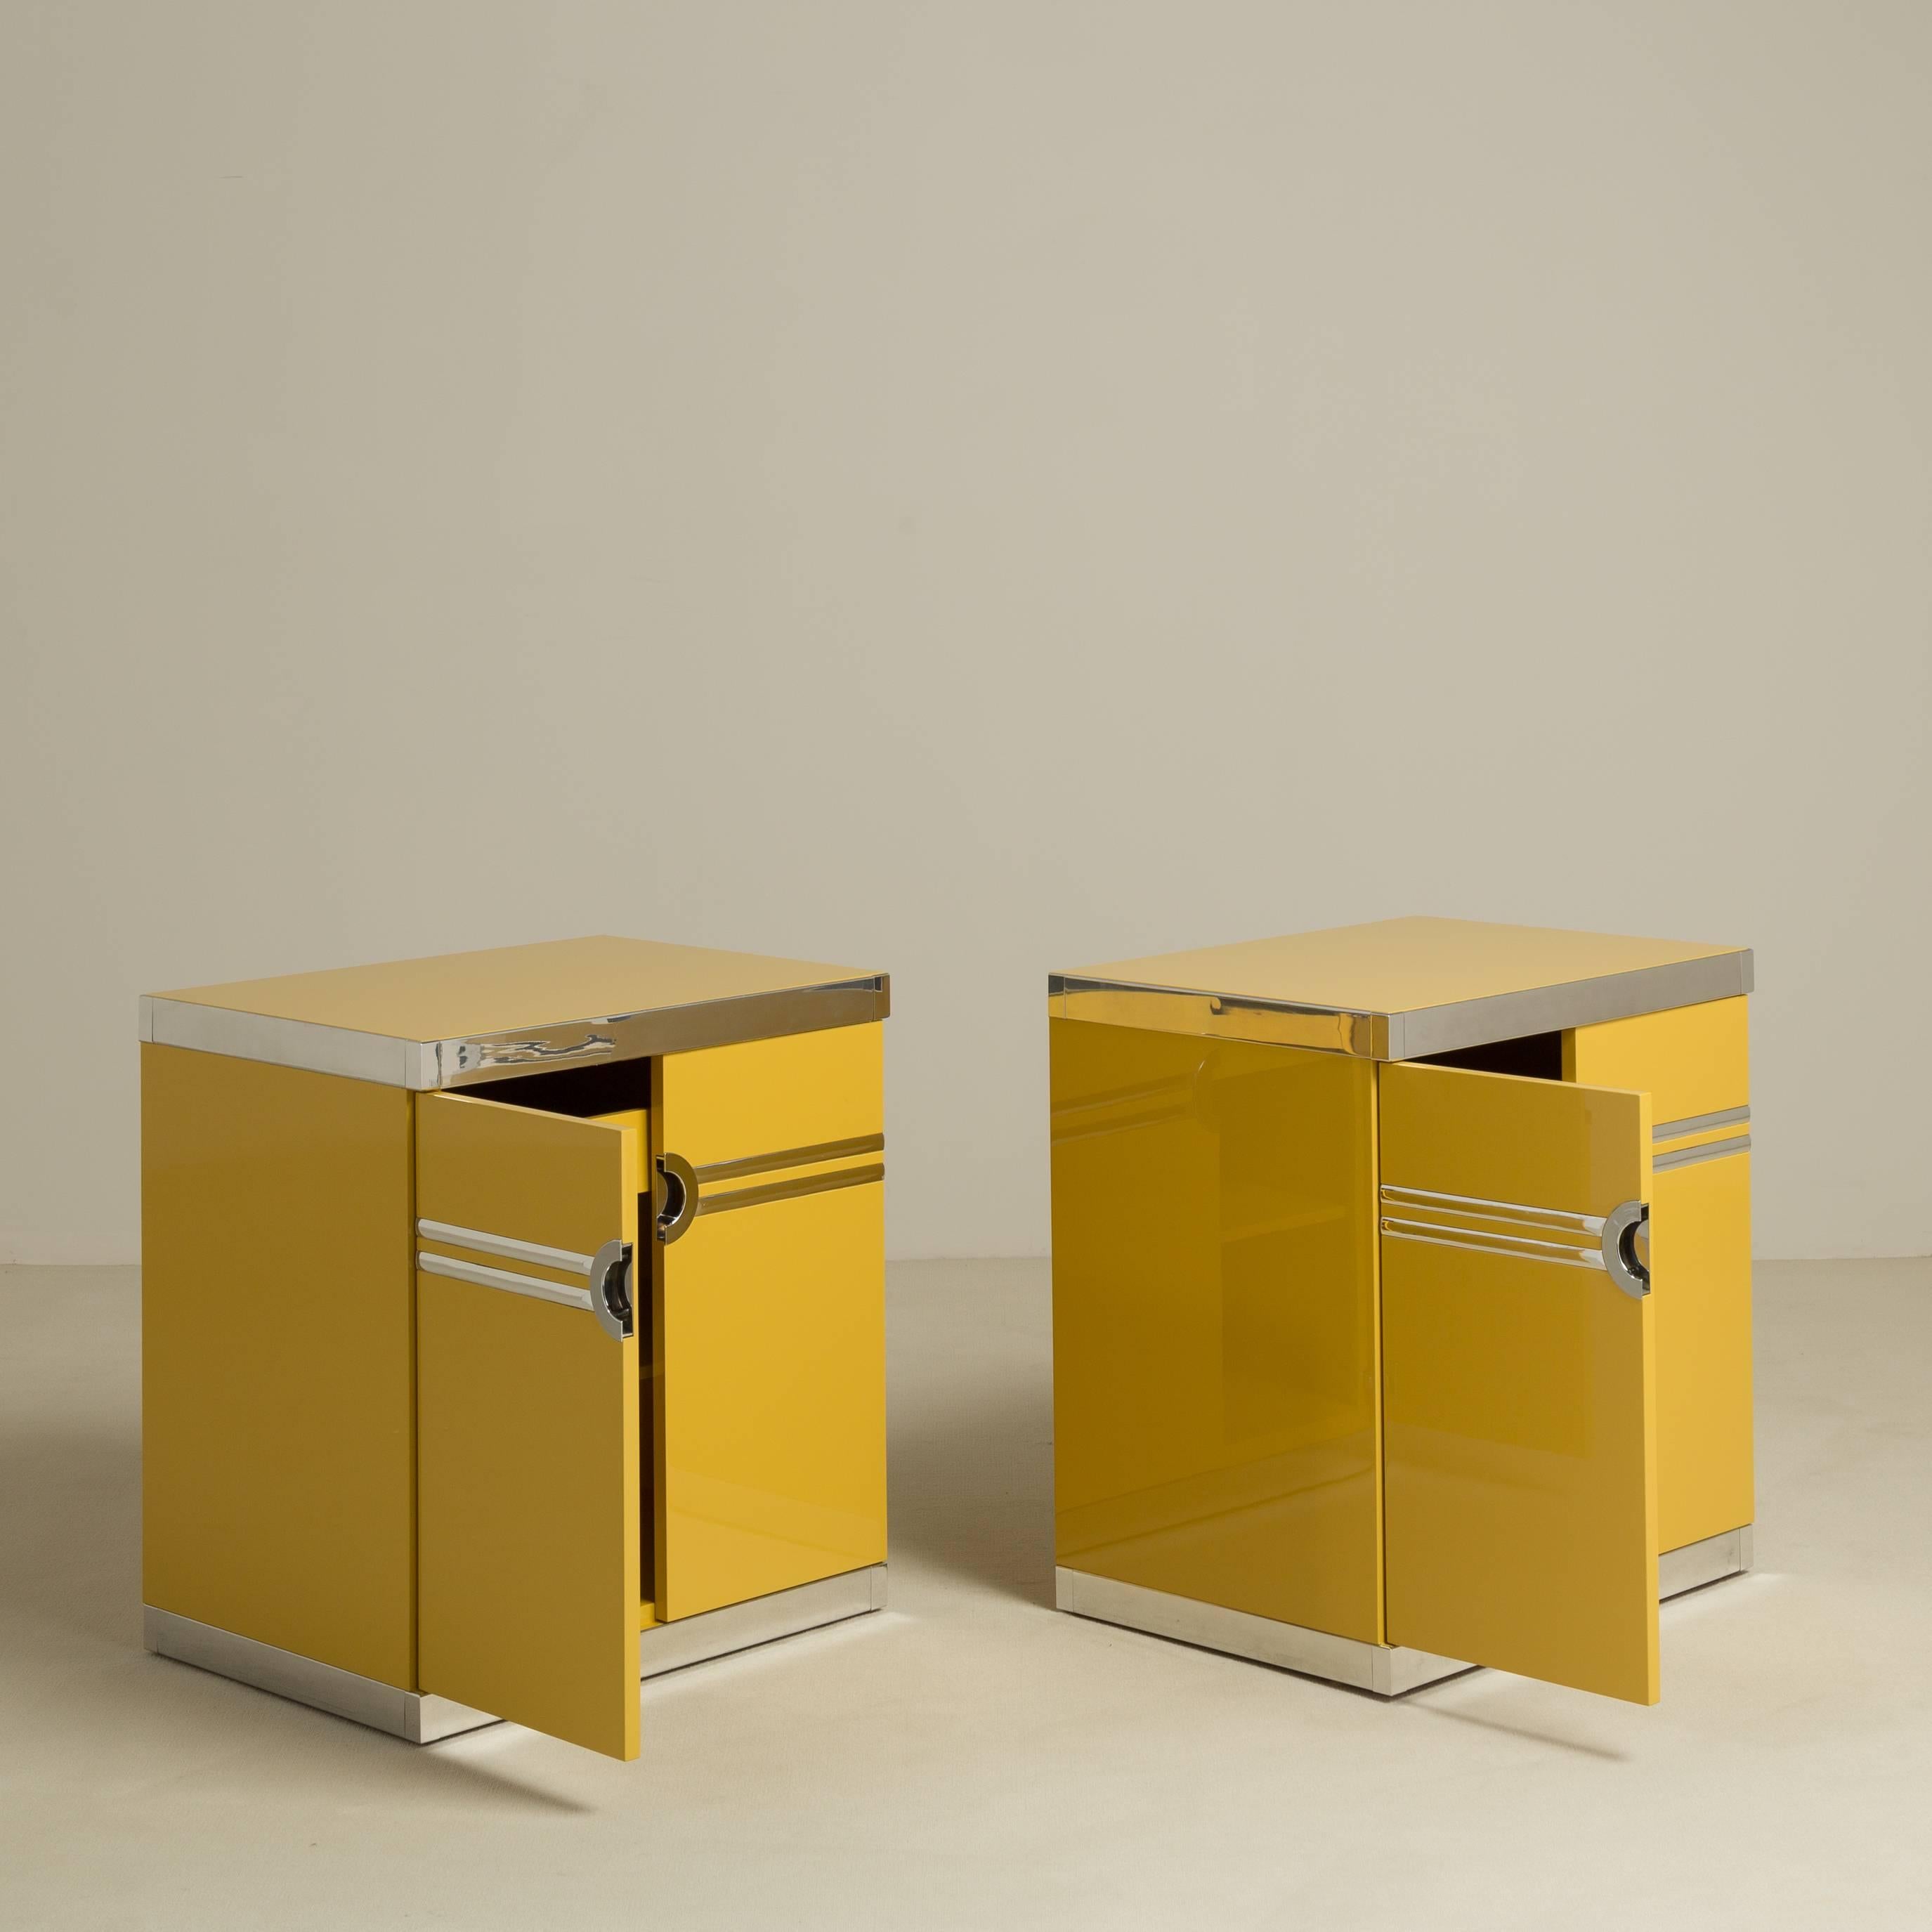 A pair of Pierre Cardin designed two-door lacquered side cabinets 1970s signed Talisman Edition.

Prices include 20% VAT which is removed for items shipped outside the EU.